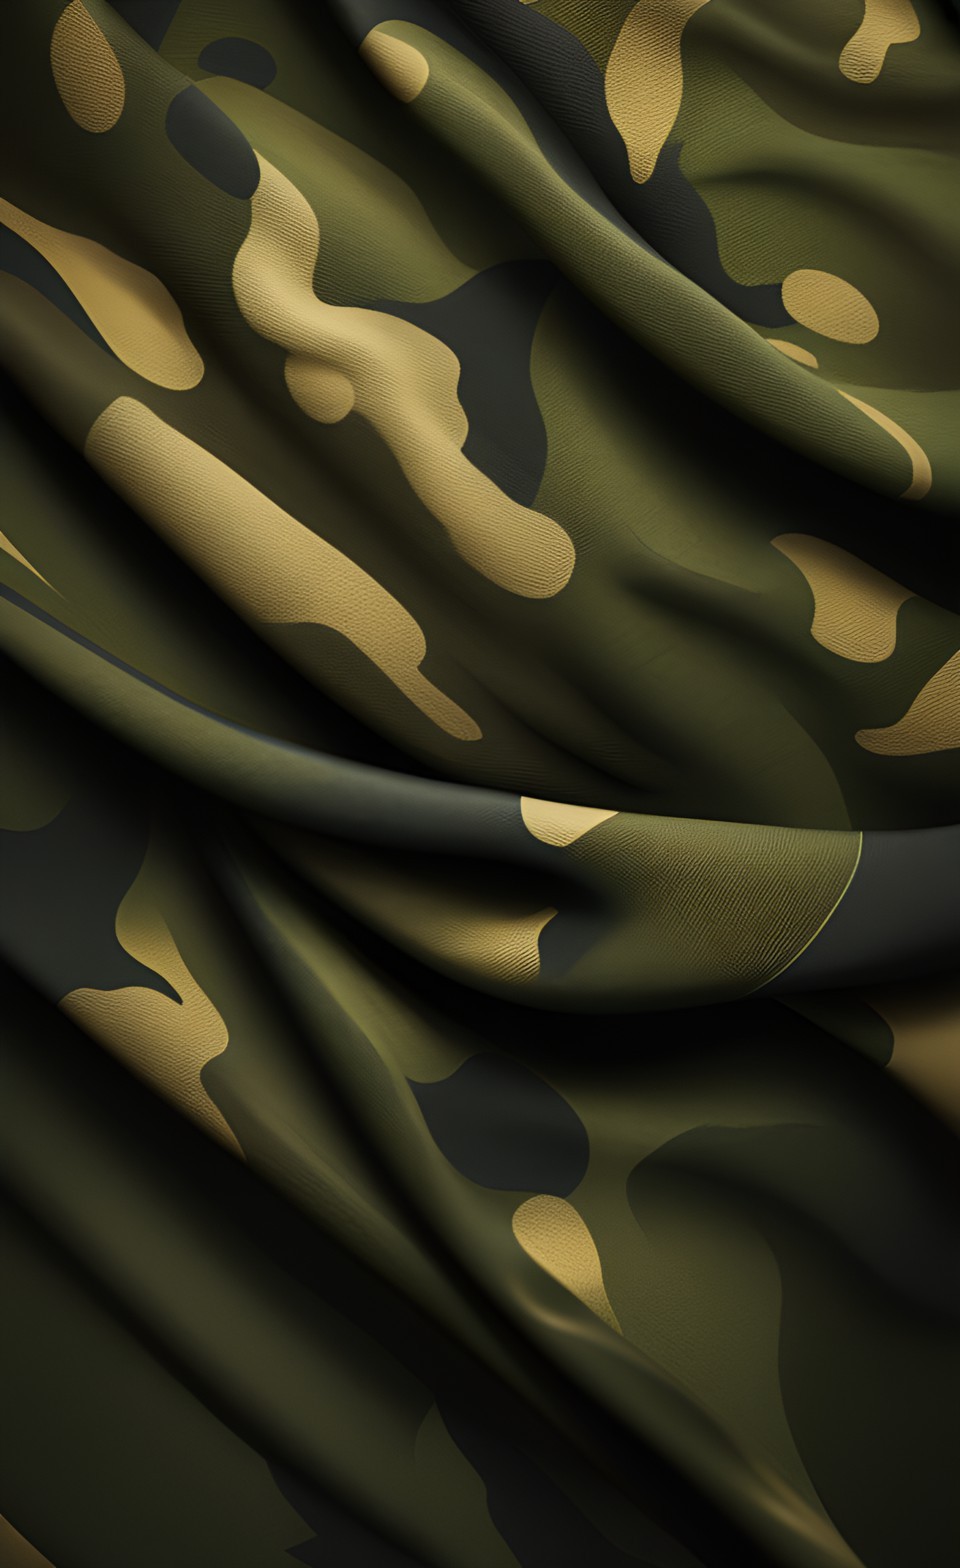 Army Cloth iPhone Wallpaper 4K